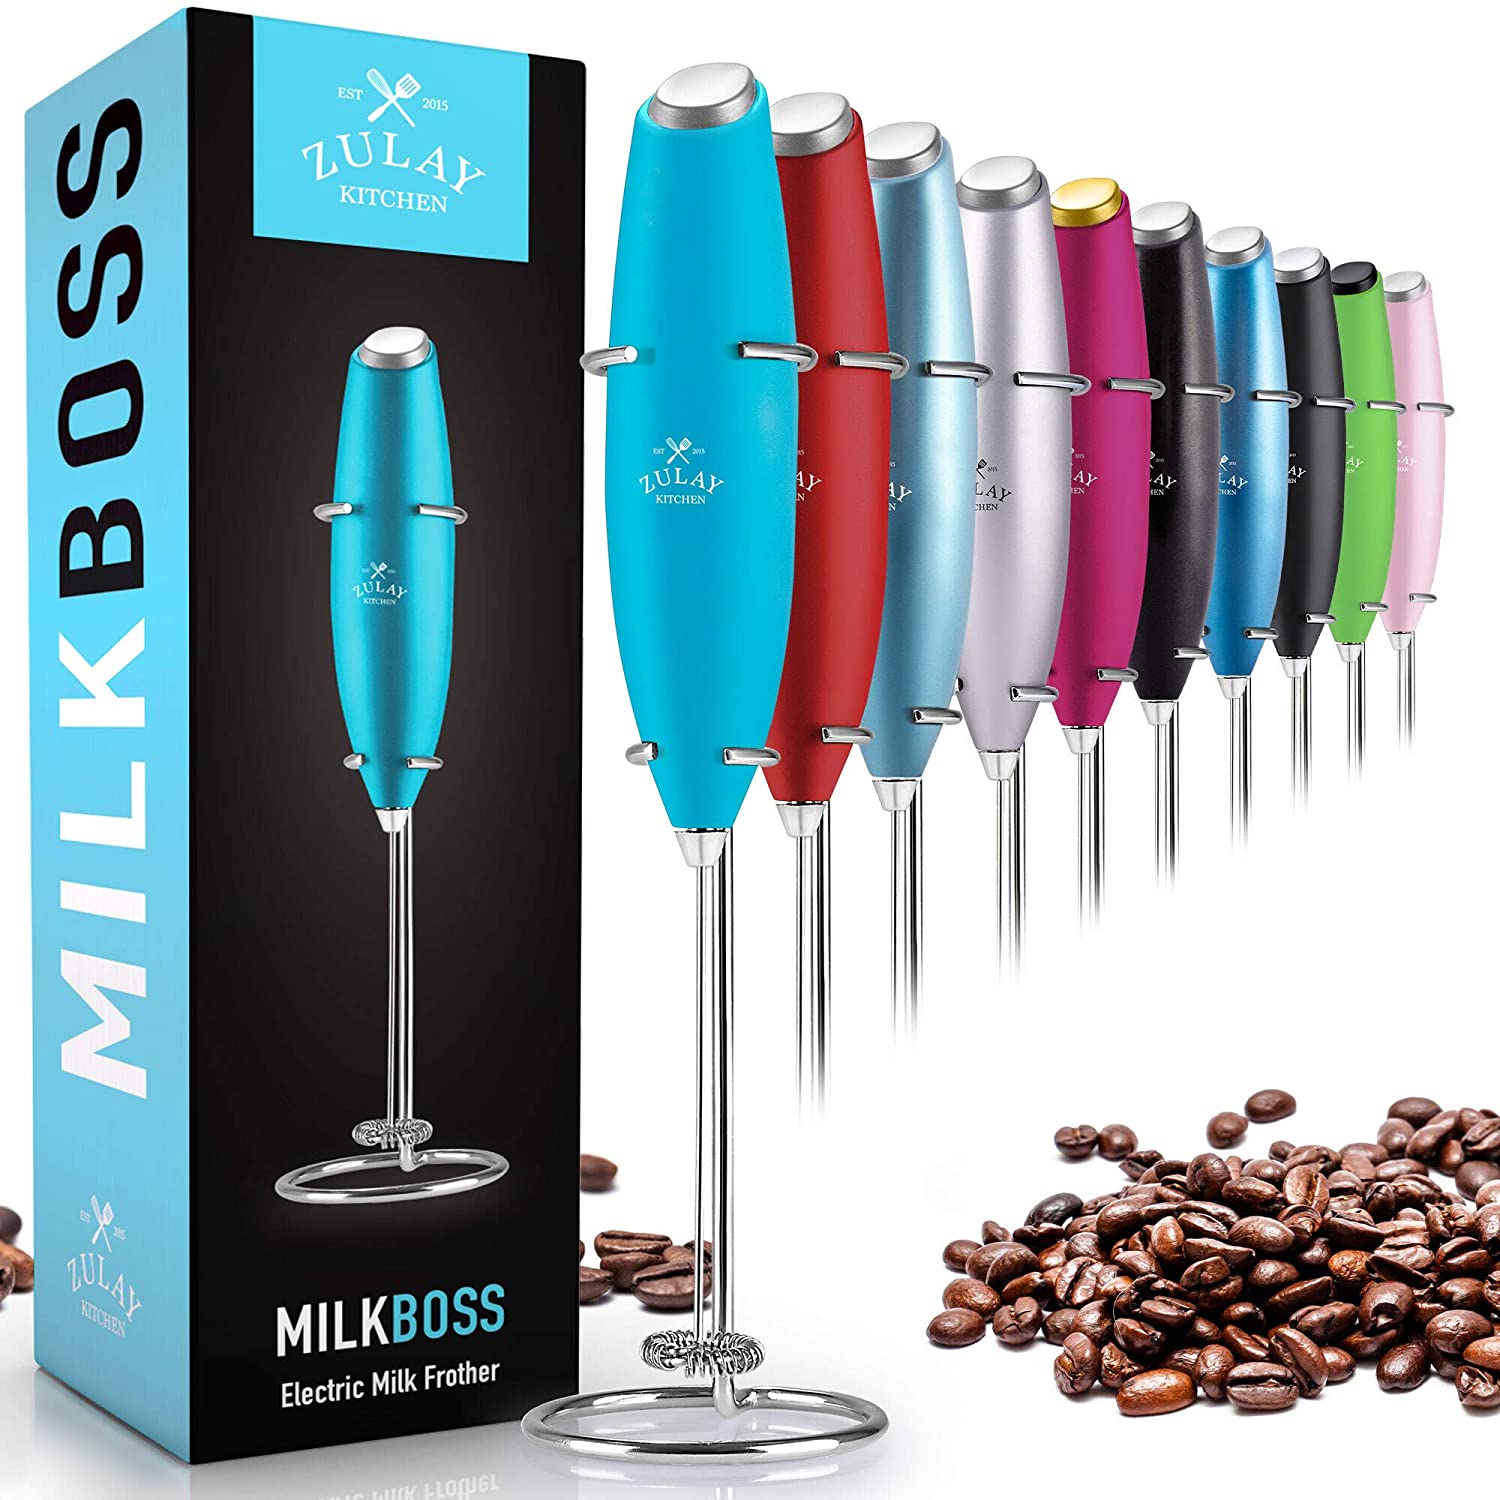 Is the Instant Milk Frother easy to clean?